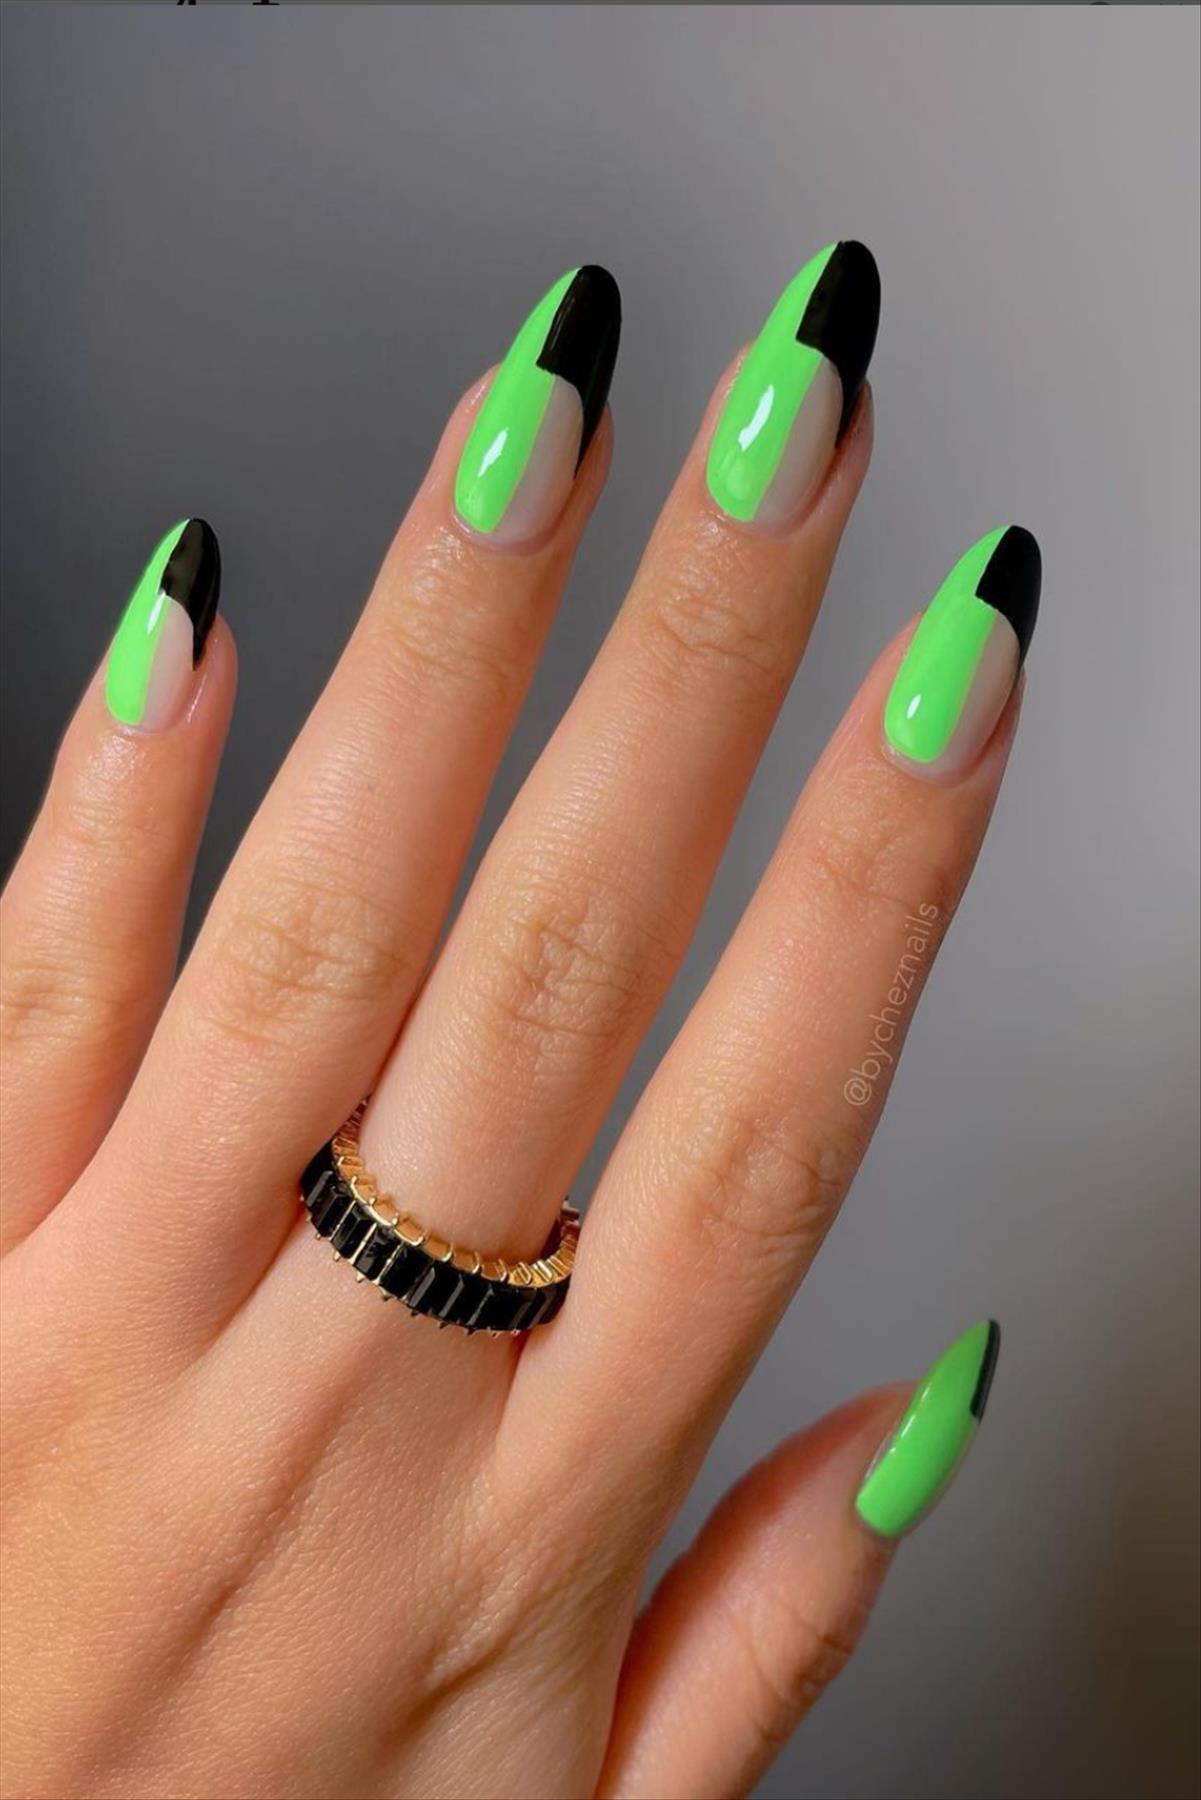 Best Spring Nail Designs Trends to Try Out in 2022